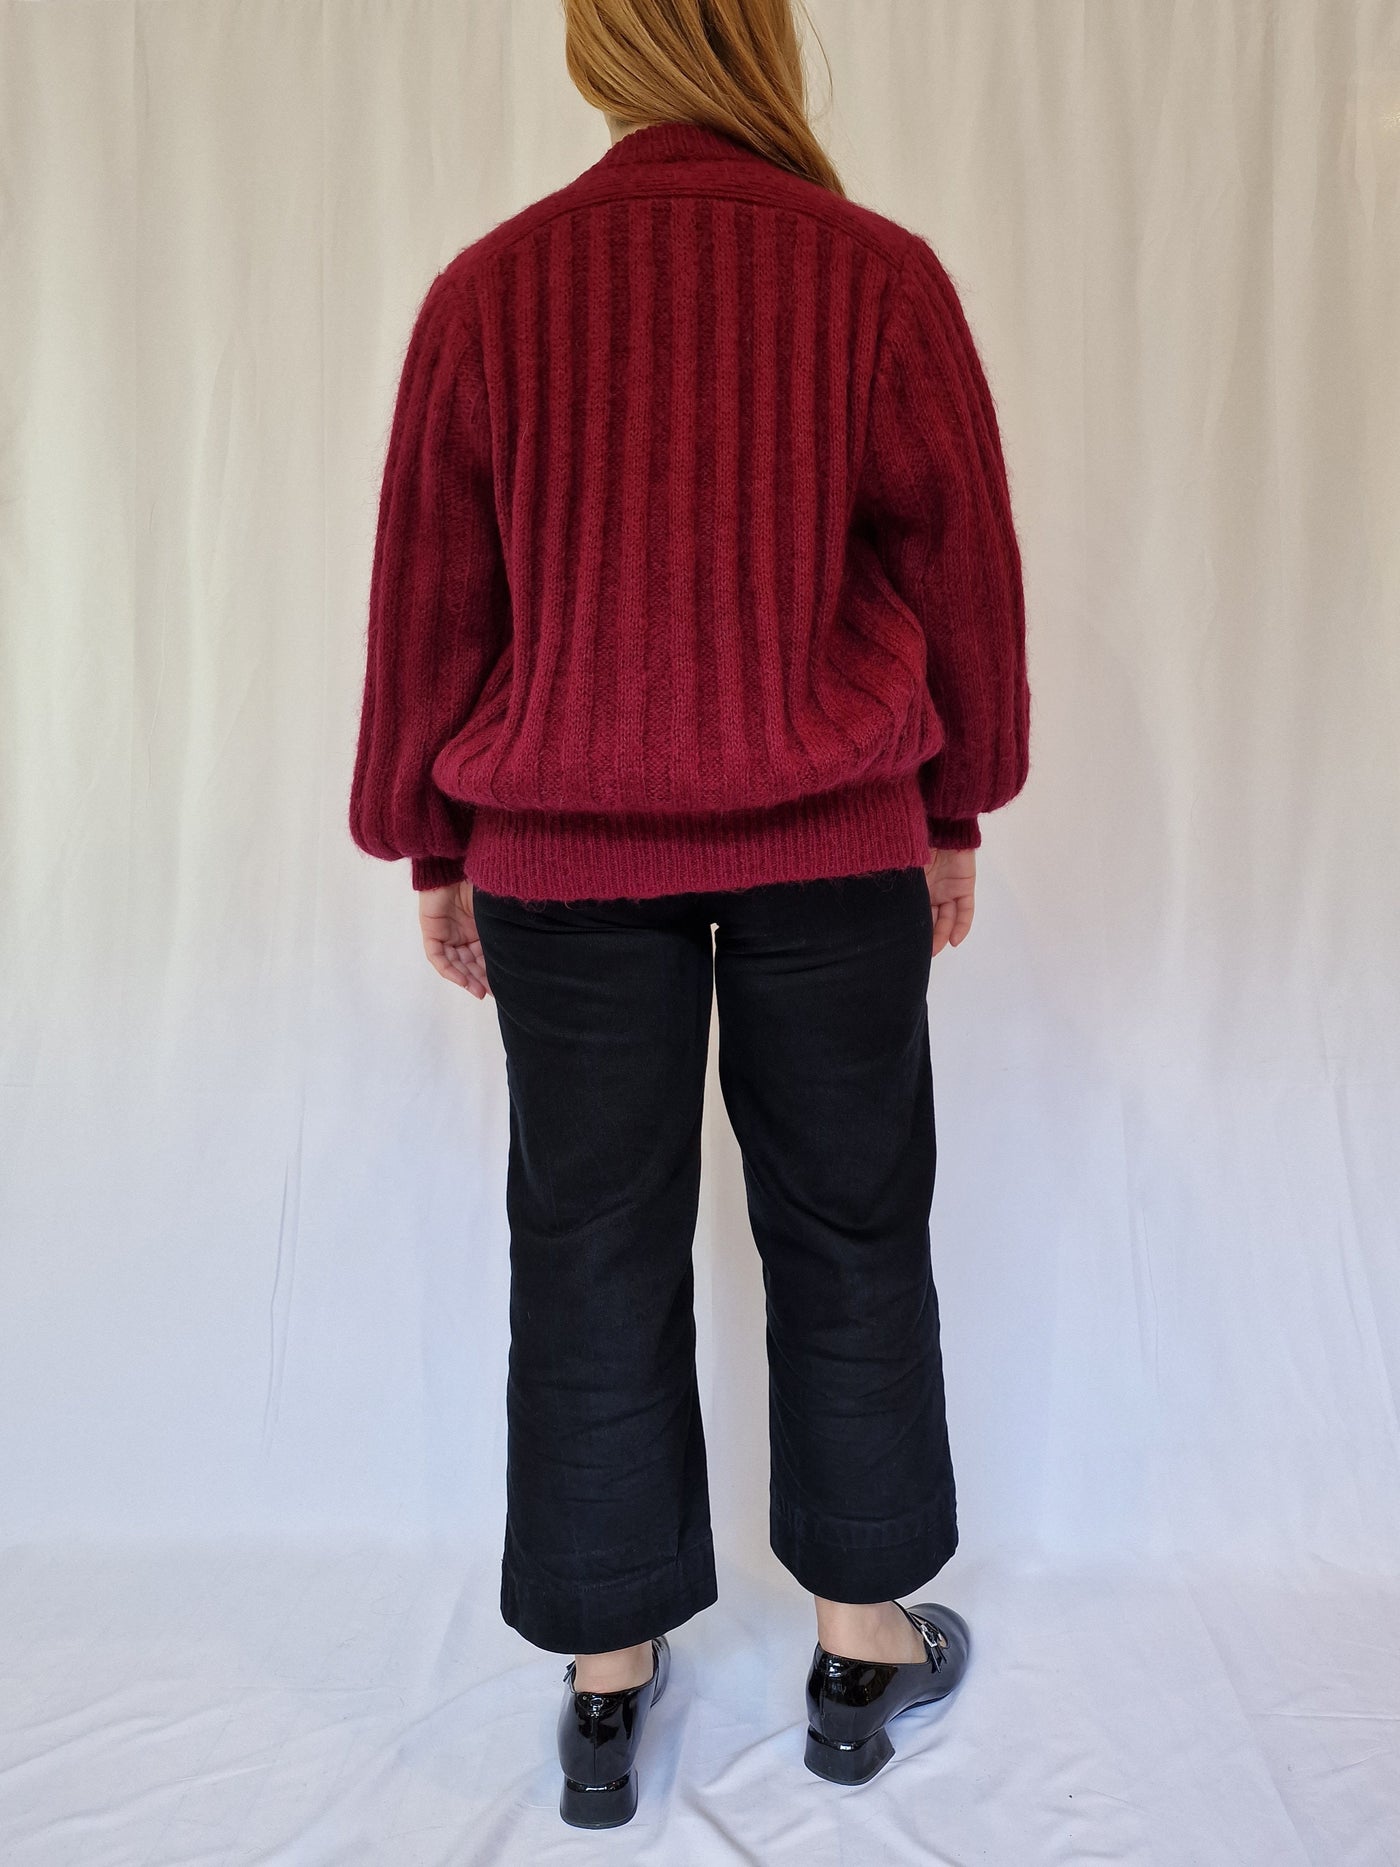 Vintage 80s Burgundy Red Knitted Crew Neck Mohair Cardigan - M/L